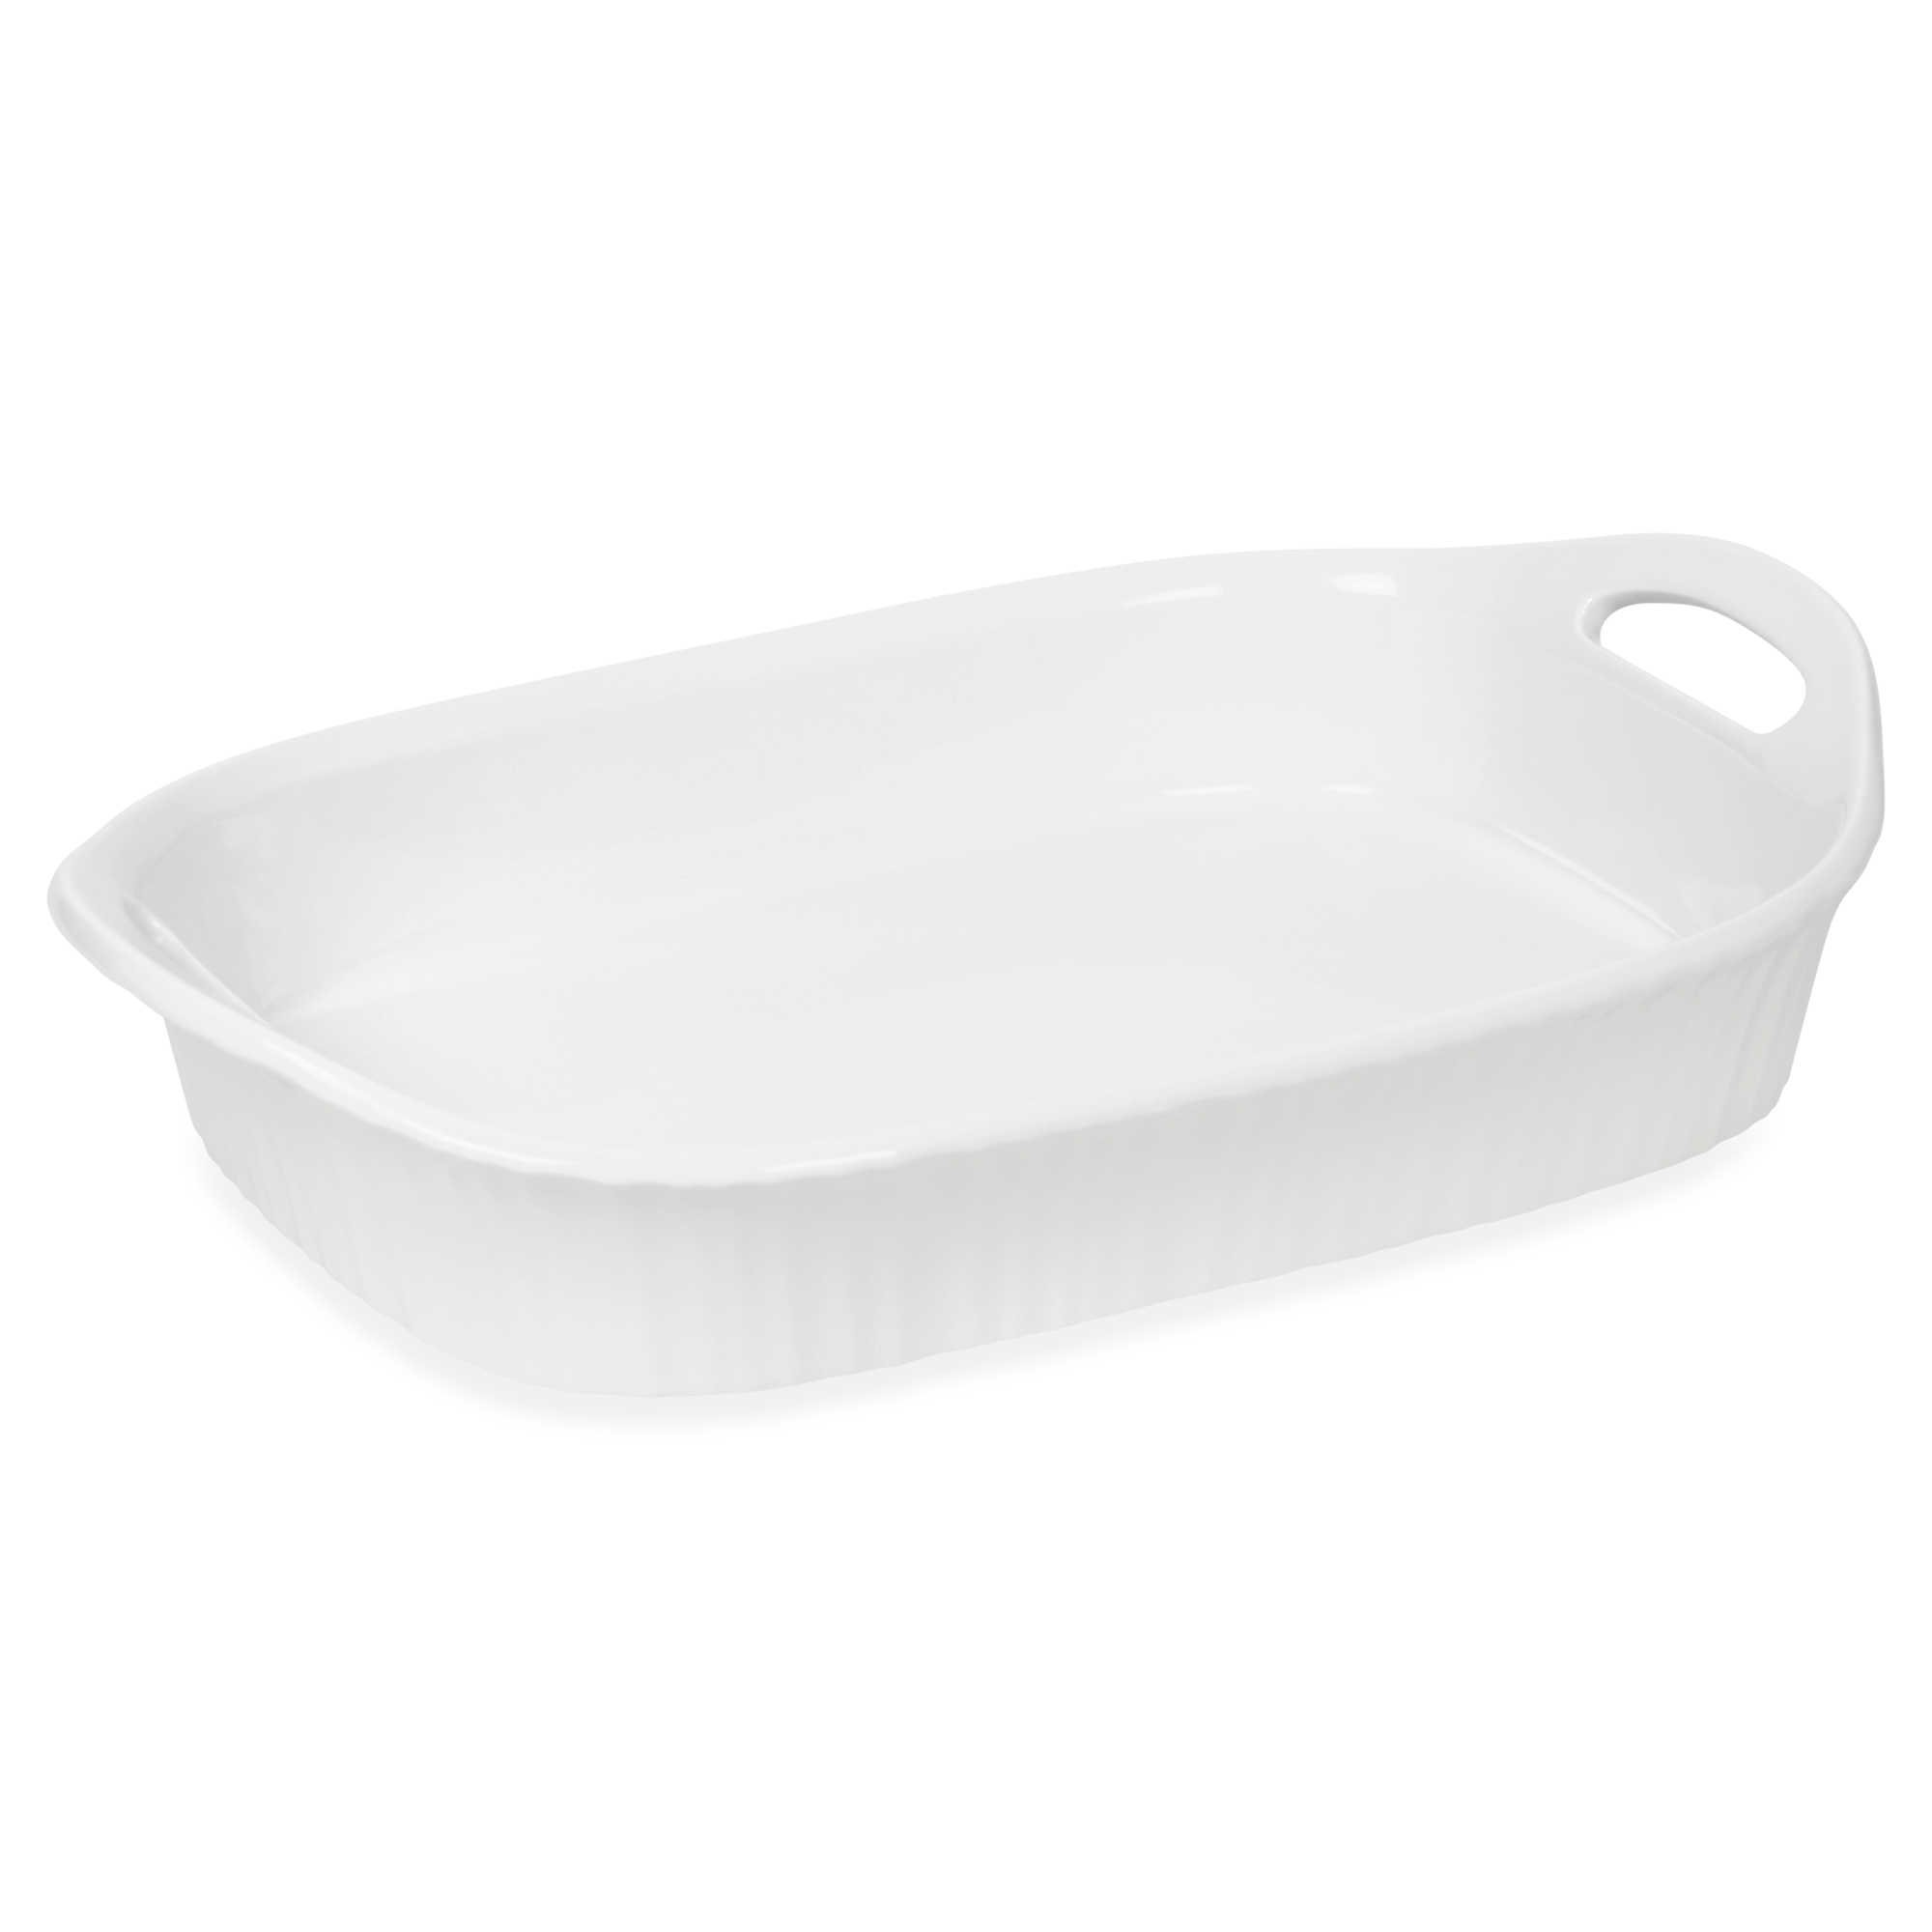 CorningWare French White III 2.8l Ceramic Oblong Casserole Dish with Sleeve Oven Microwave Refrigerator and Freezer Safe